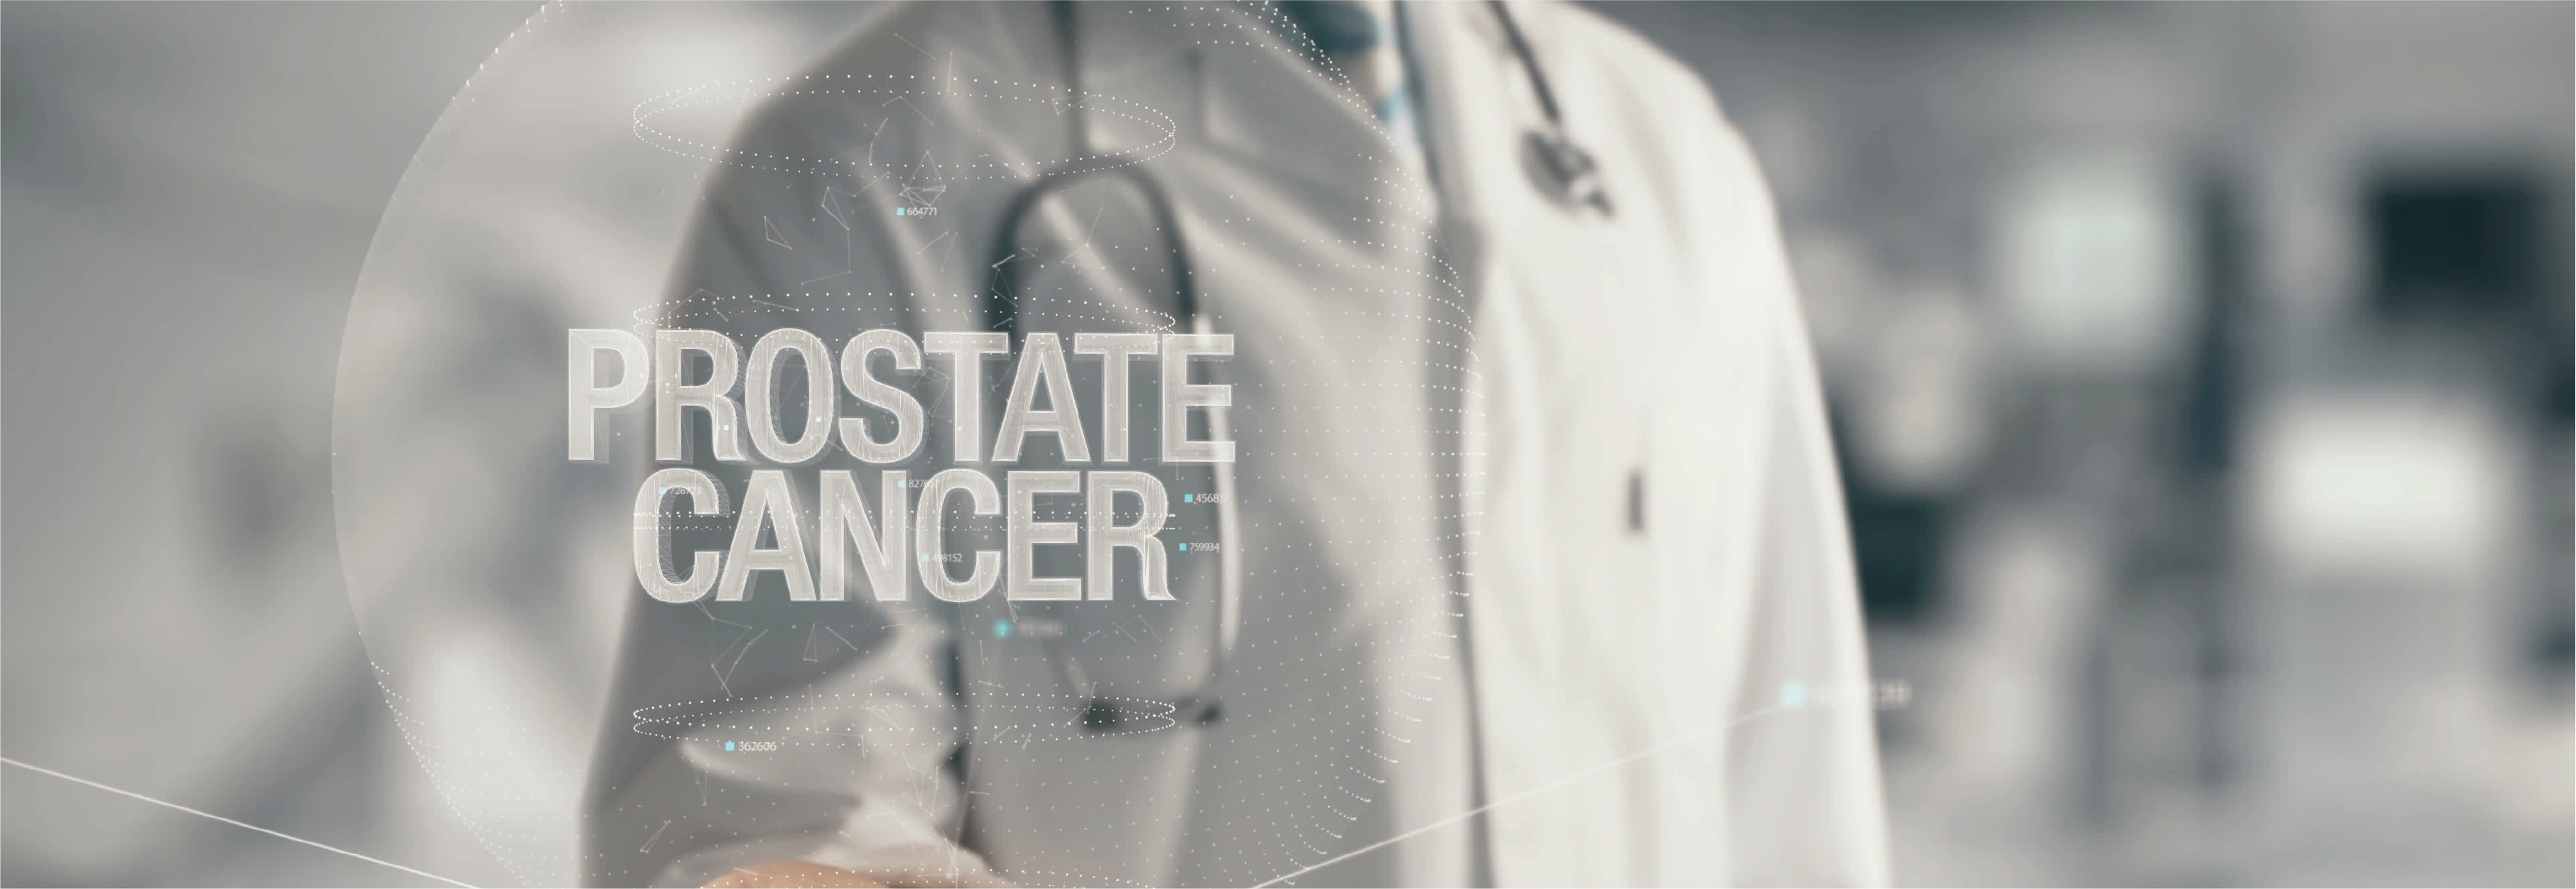 Advanced Prostate Cancer Treatment Extends Lives Duke Health Referring Physicians 1004